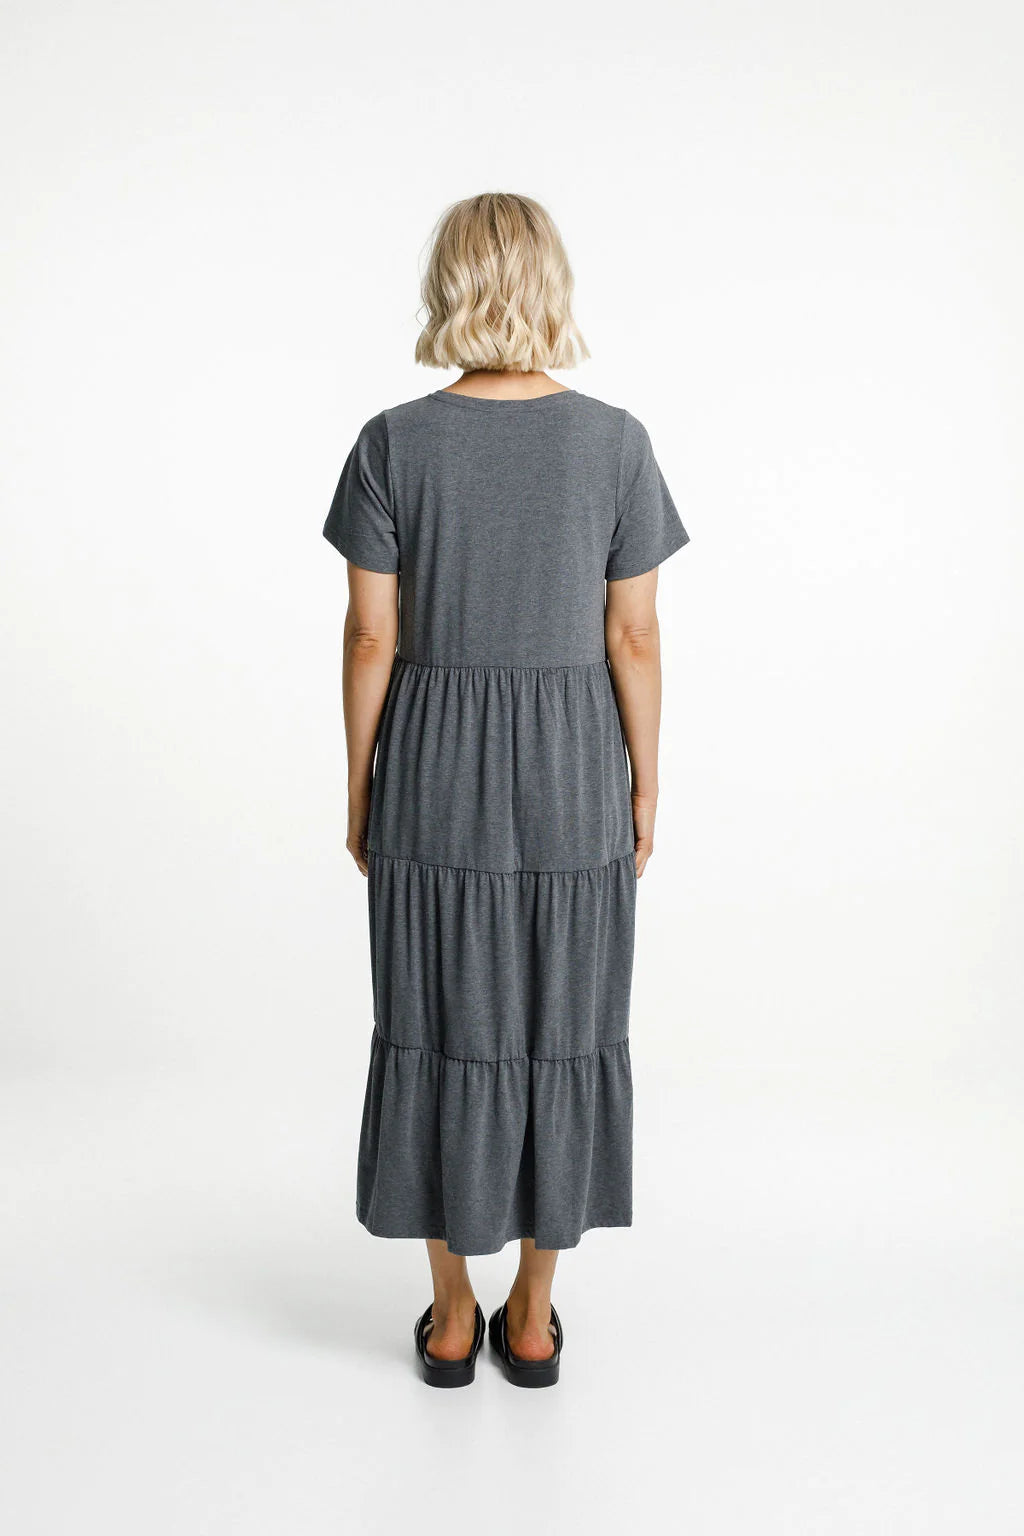 home-lee - Kendall S/S Dress - Charcoal